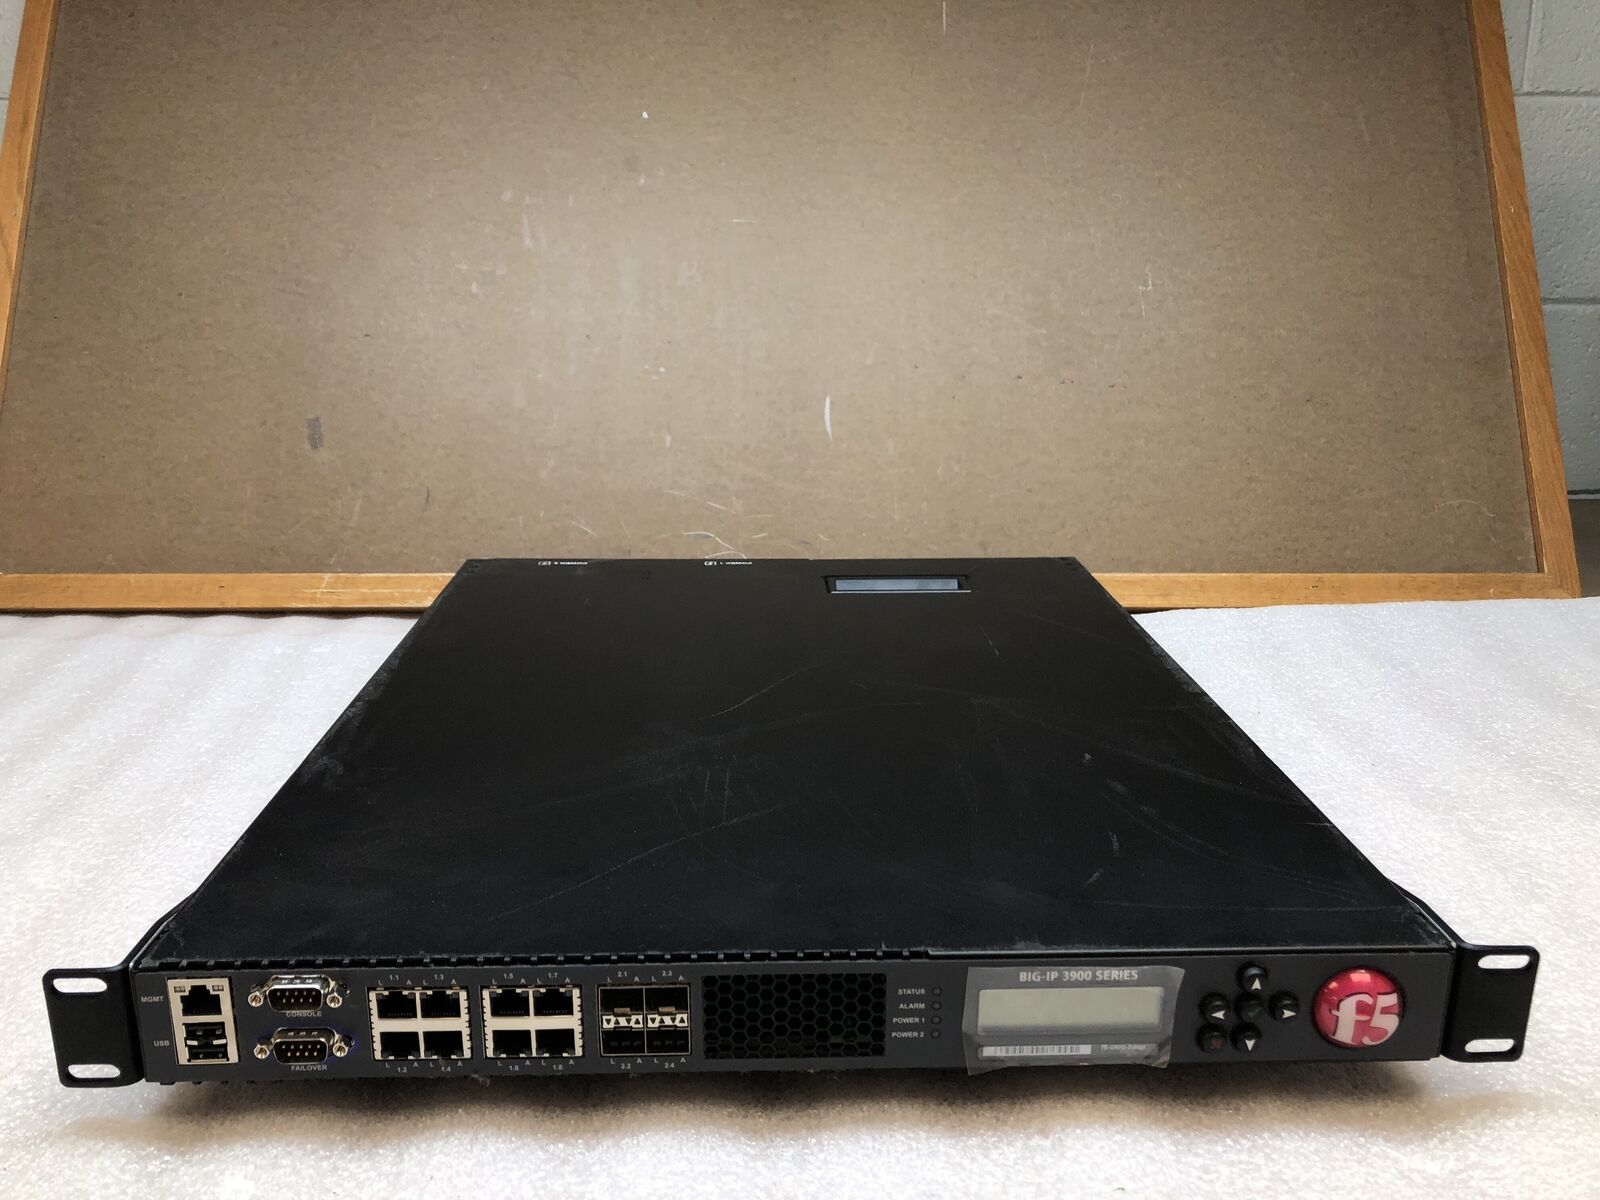 F5 BIG-IP 3900 Series Load Balance Local Traffic Manager Ethernet Switch NO HDDs